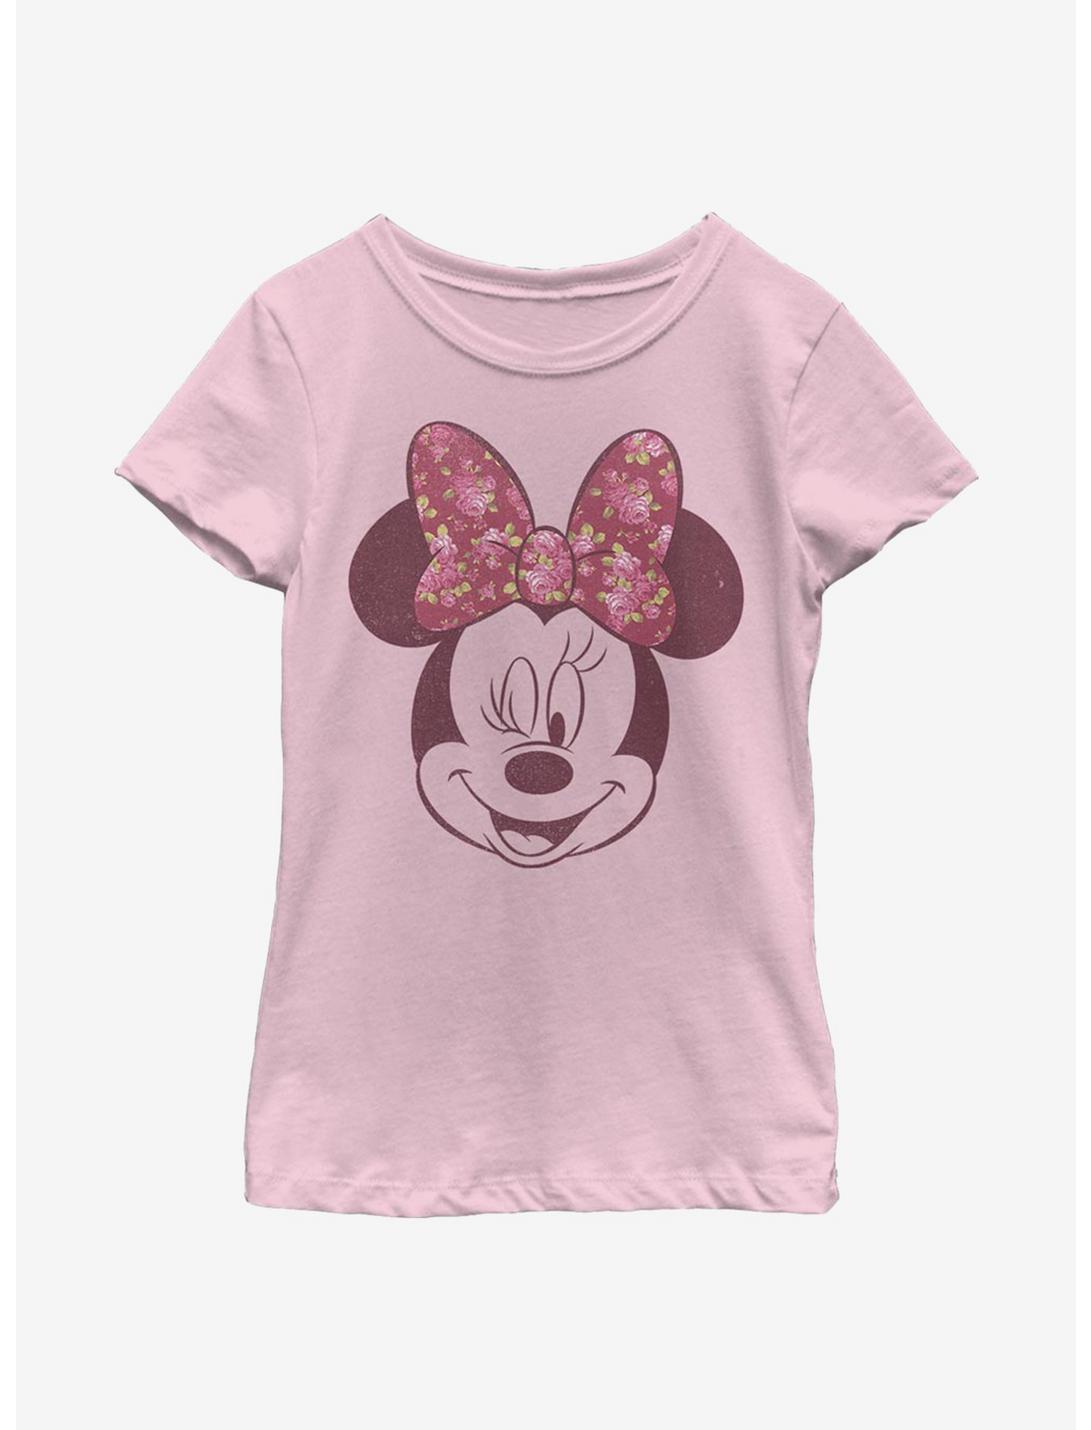 Disney Minnie Mouse Love Rose Youth Girls T-Shirt, PINK, hi-res